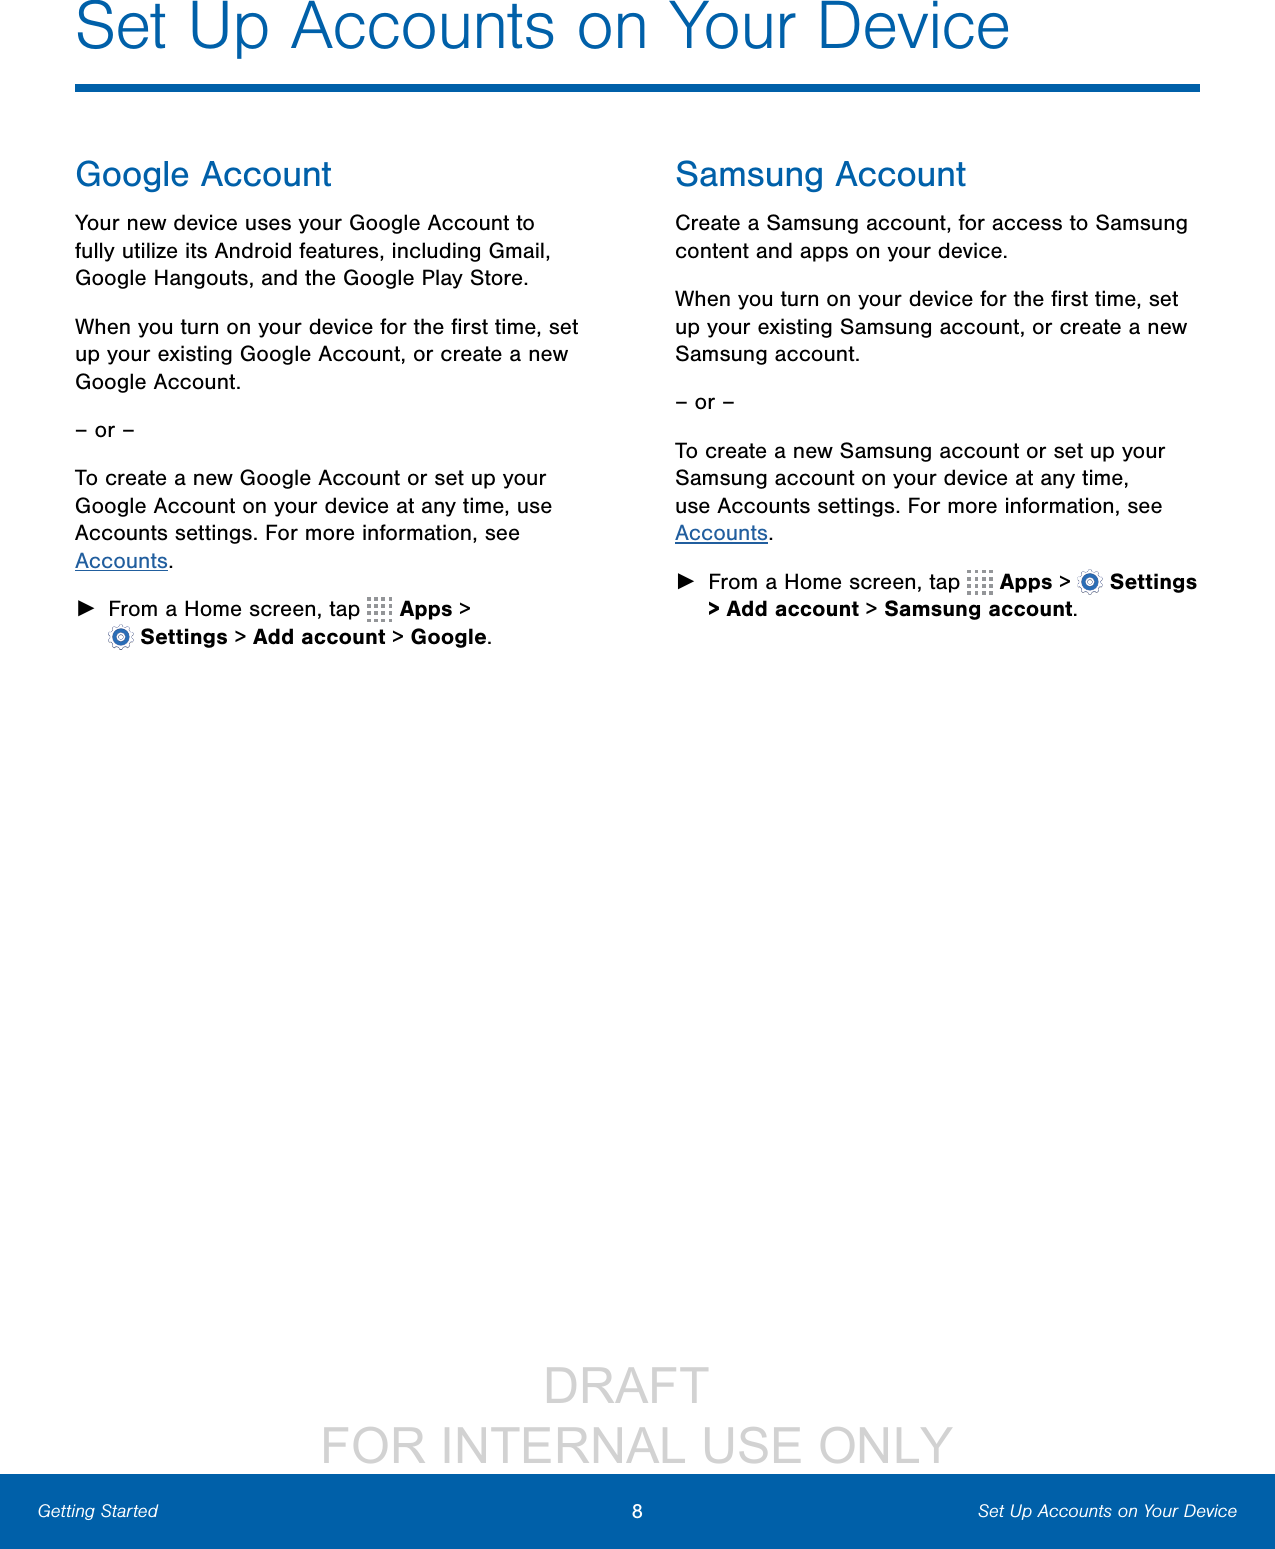                 DRAFT FOR INTERNAL USE ONLY8Set Up Accounts on Your DeviceGetting StartedGoogle AccountYour new device uses your Google Account to fully utilize its Android features, including Gmail, GoogleHangouts, and the Google Play Store. When you turn on your device for the ﬁrst time, set up your existing Google Account, or create a new GoogleAccount.– or –To create a new Google Account or set up your Google Account on your device at any time, use Accounts settings. Formore information, see Accounts. ►From a Home screen, tap   Apps &gt; Settings&gt; Add account &gt; Google.Samsung AccountCreate a Samsung account, for access to Samsung content and apps on your device. When you turn on your device for the ﬁrst time, set up your existing Samsung account, or create a new Samsung account.– or –To create a new Samsung account or set up your Samsung account on your device at any time, use Accounts settings. Formore information, see Accounts. ►From a Home screen, tap   Apps &gt;  Settings &gt;Add account &gt; Samsungaccount.Set Up Accounts on Your Device